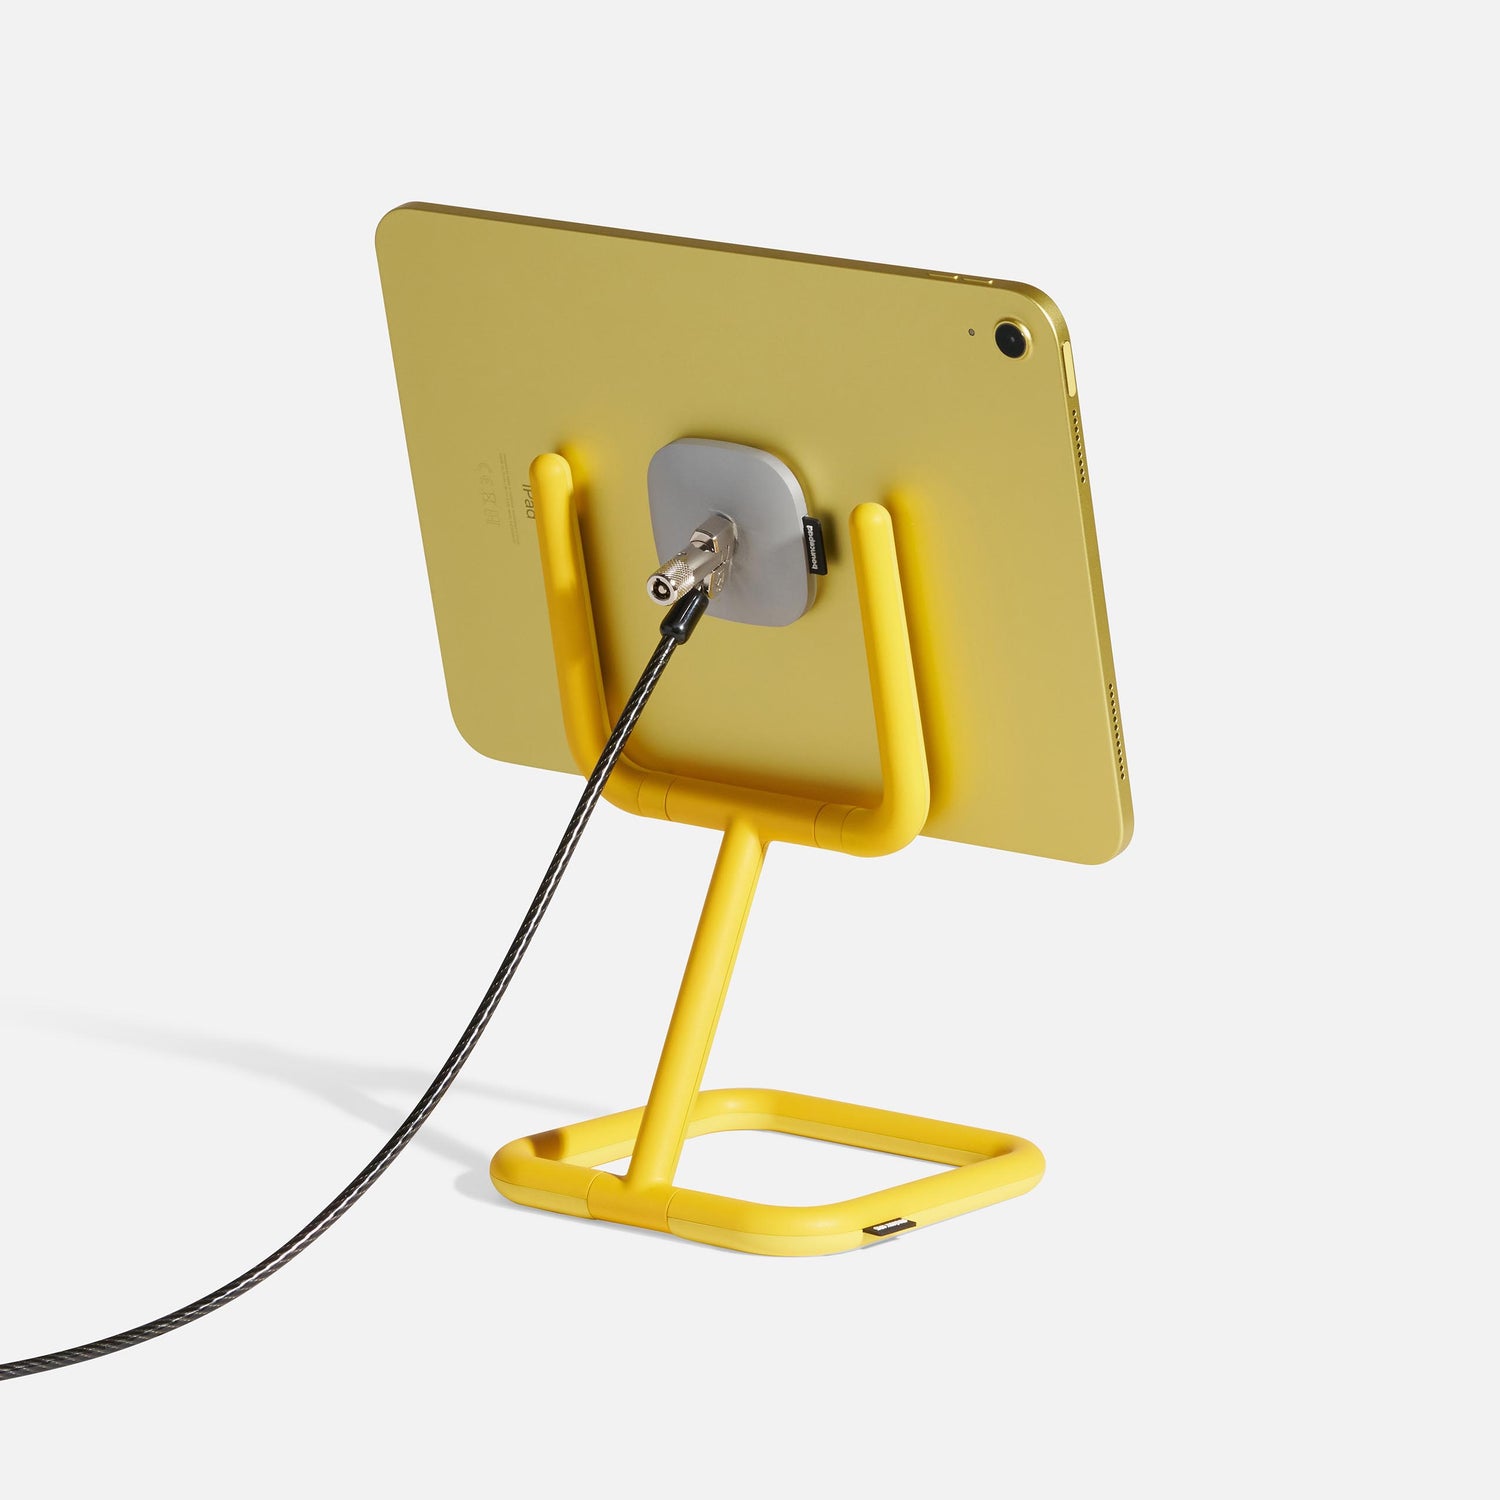 Adjustable tablet stand in yellow - Bouncepad Go